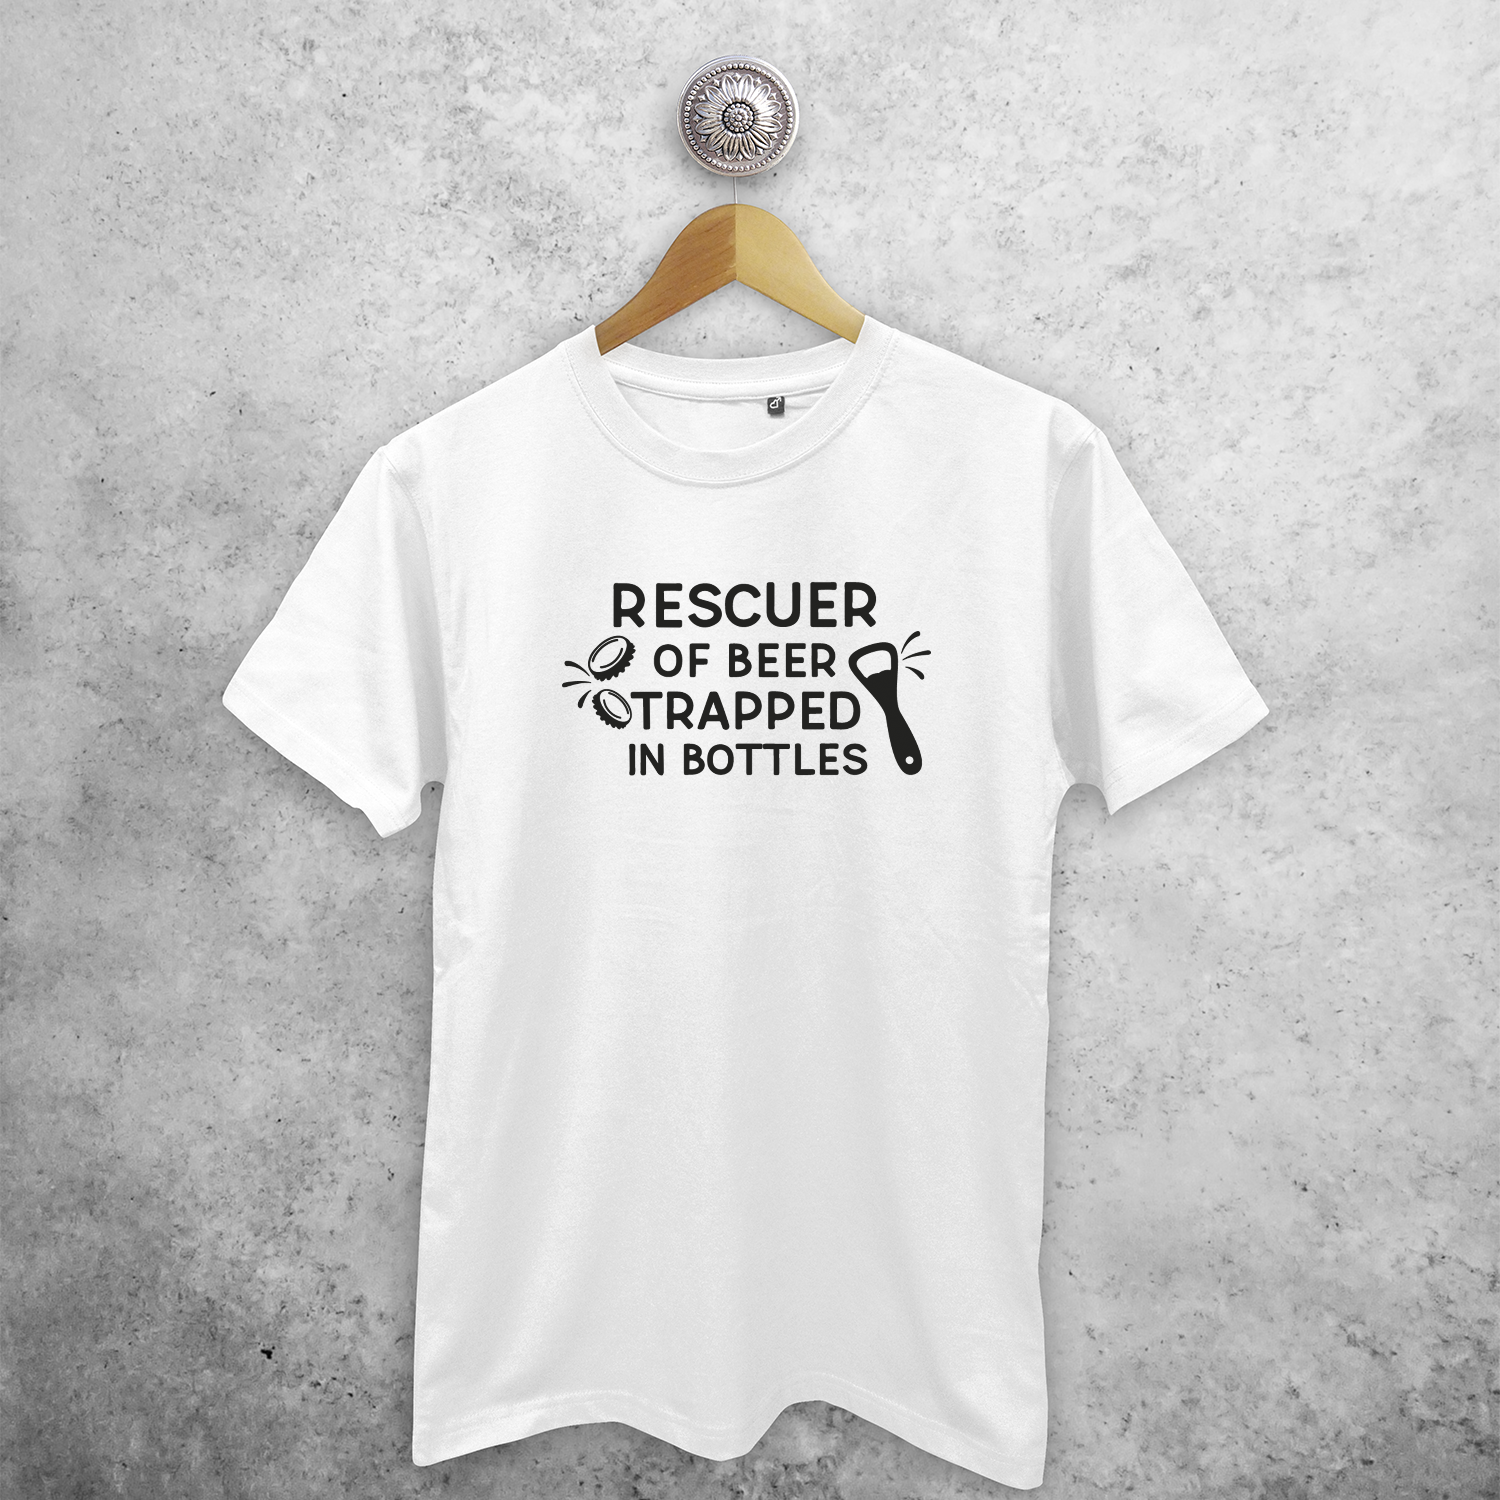 Rescuer of beer trapped in bottles' volwassene shirt